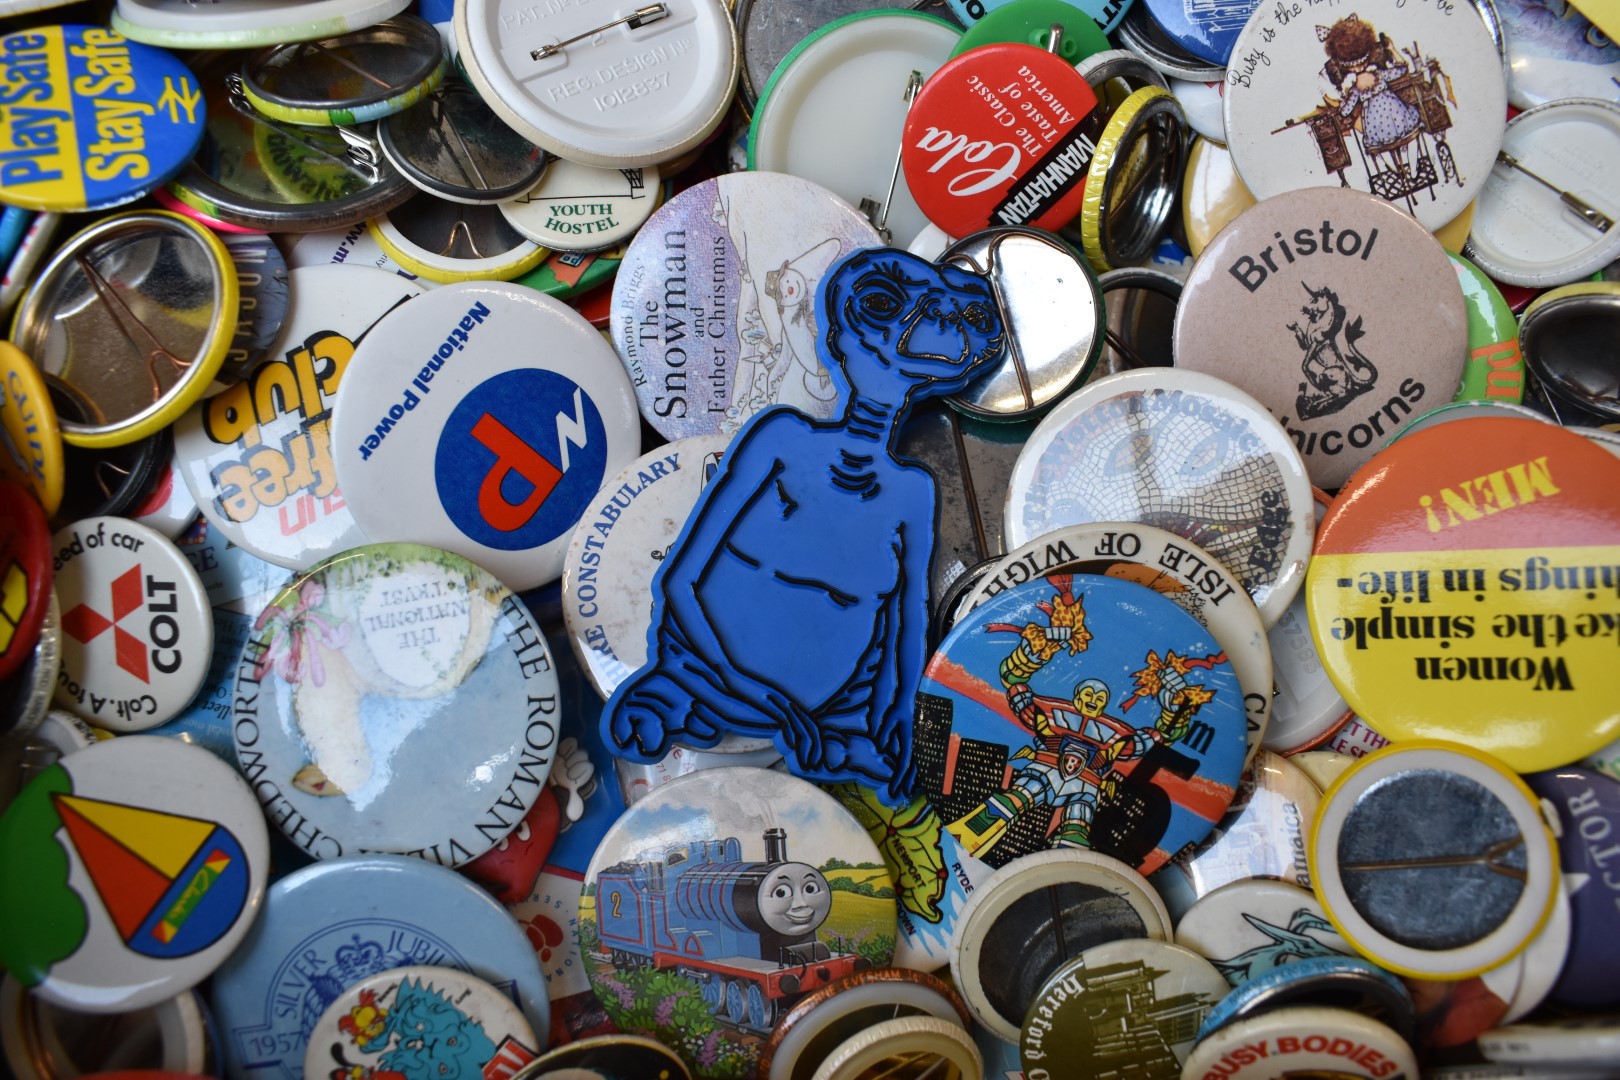 Over 1000 vintage and collectable badges including social history, advertising, humorous, slogans, - Image 9 of 9